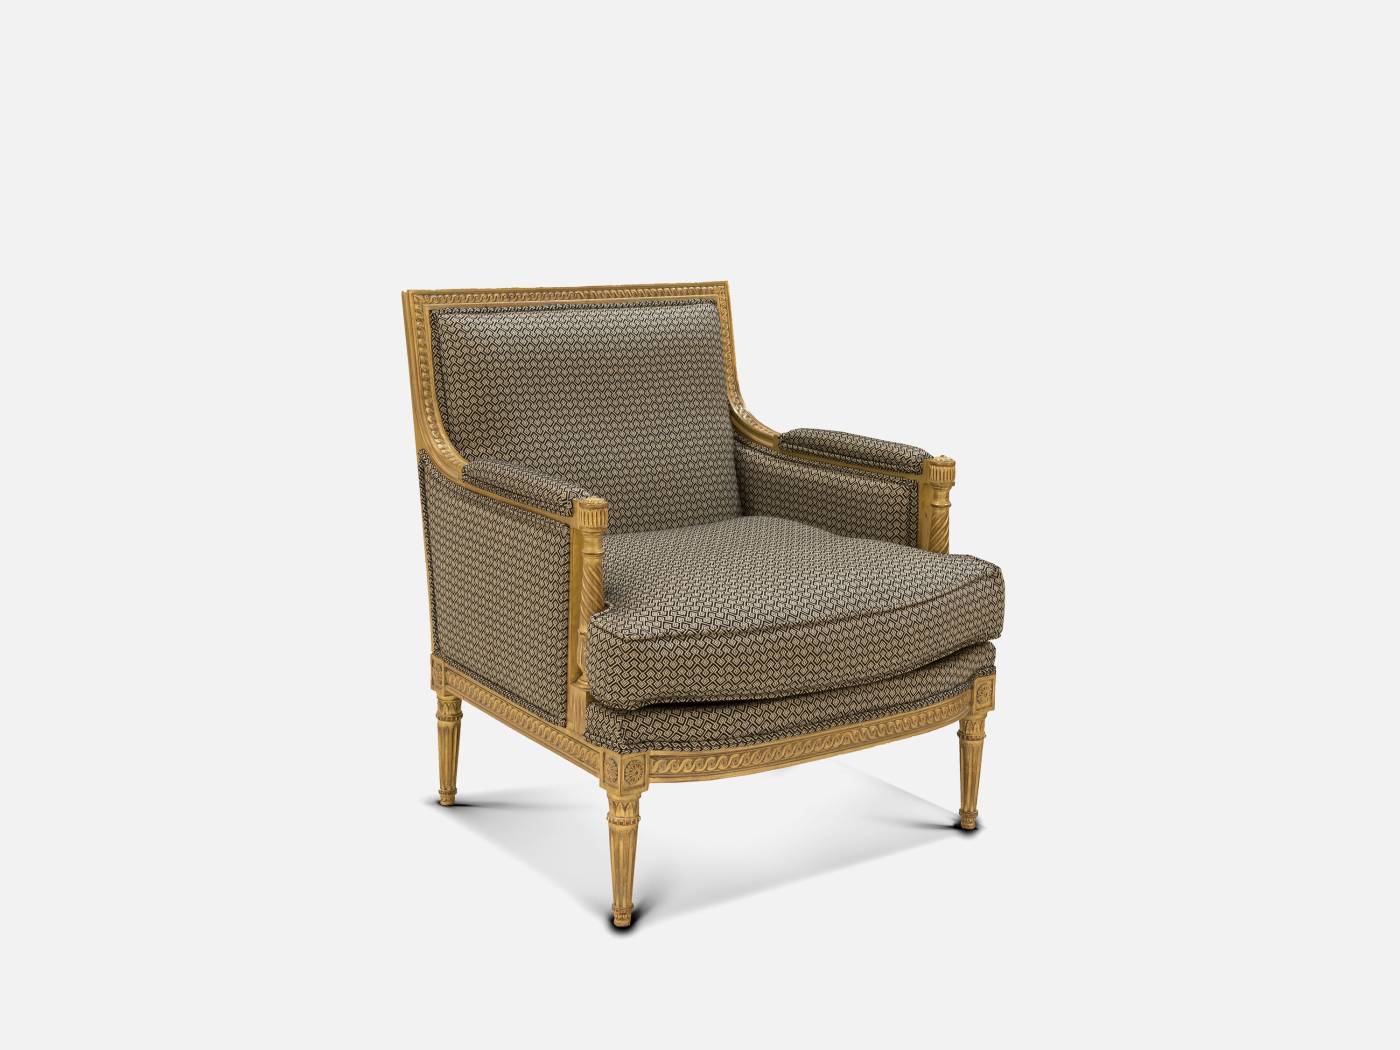 ART. 2233 – Discover the elegance of luxury classic Armchairs made in Italy by C.G. Capelletti. Luxury classic furniture that combines style and craftsmanship.